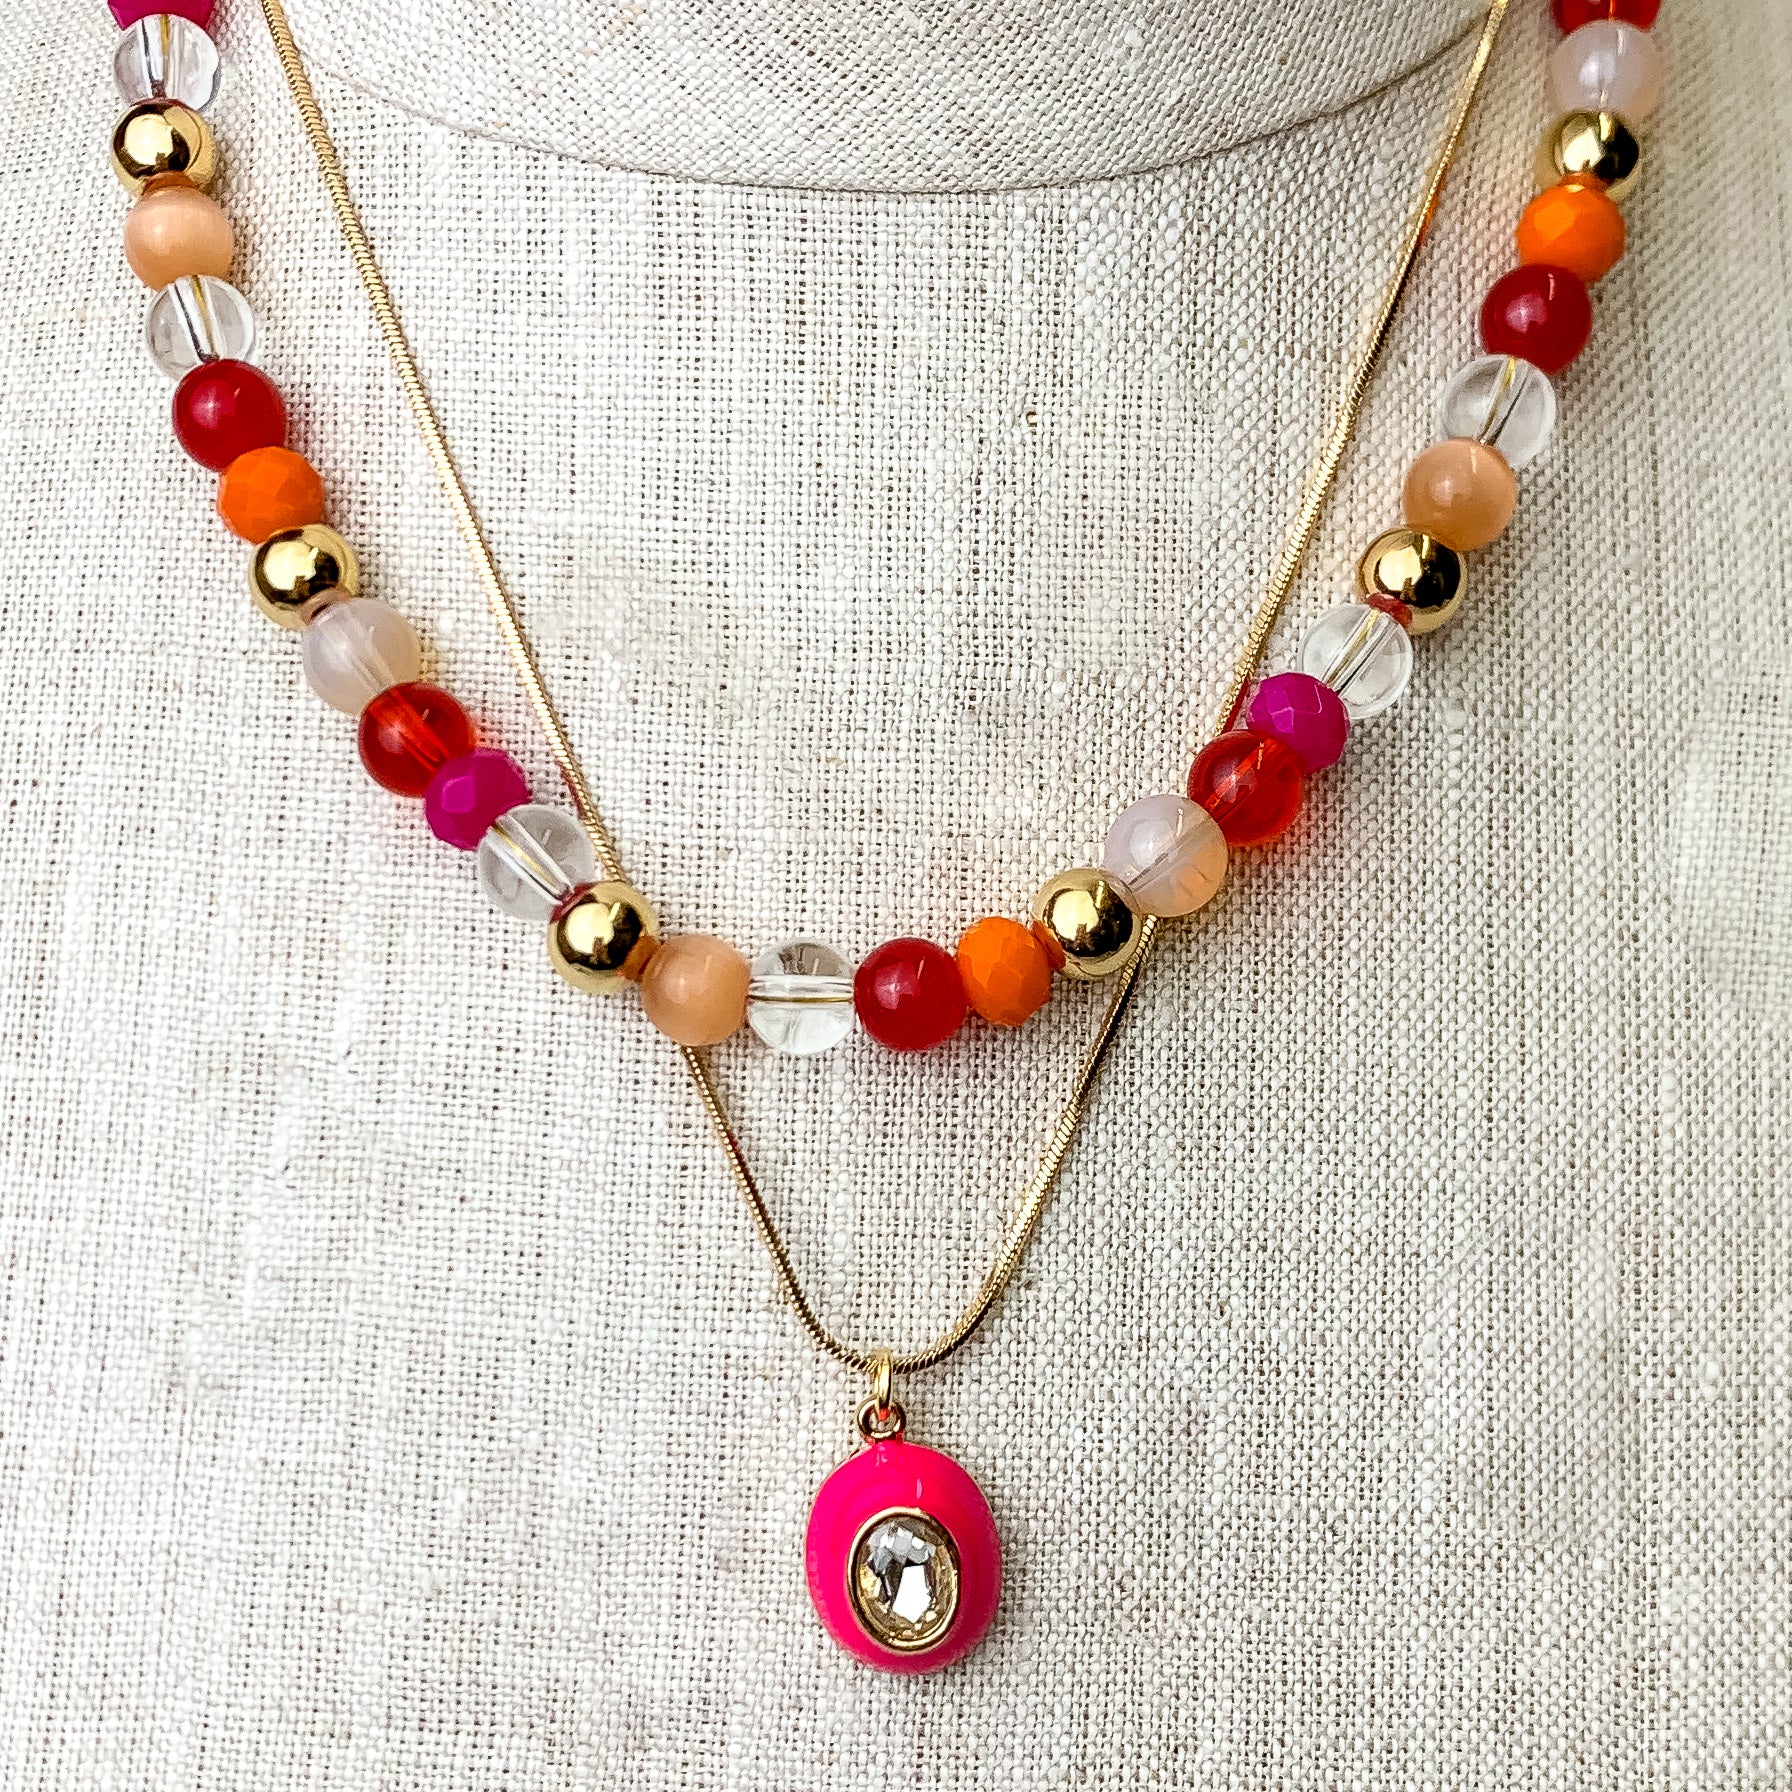 This Multicolored Layering Necklace with an Oval Pendant id pictured on an ivory mannequin with a white background.